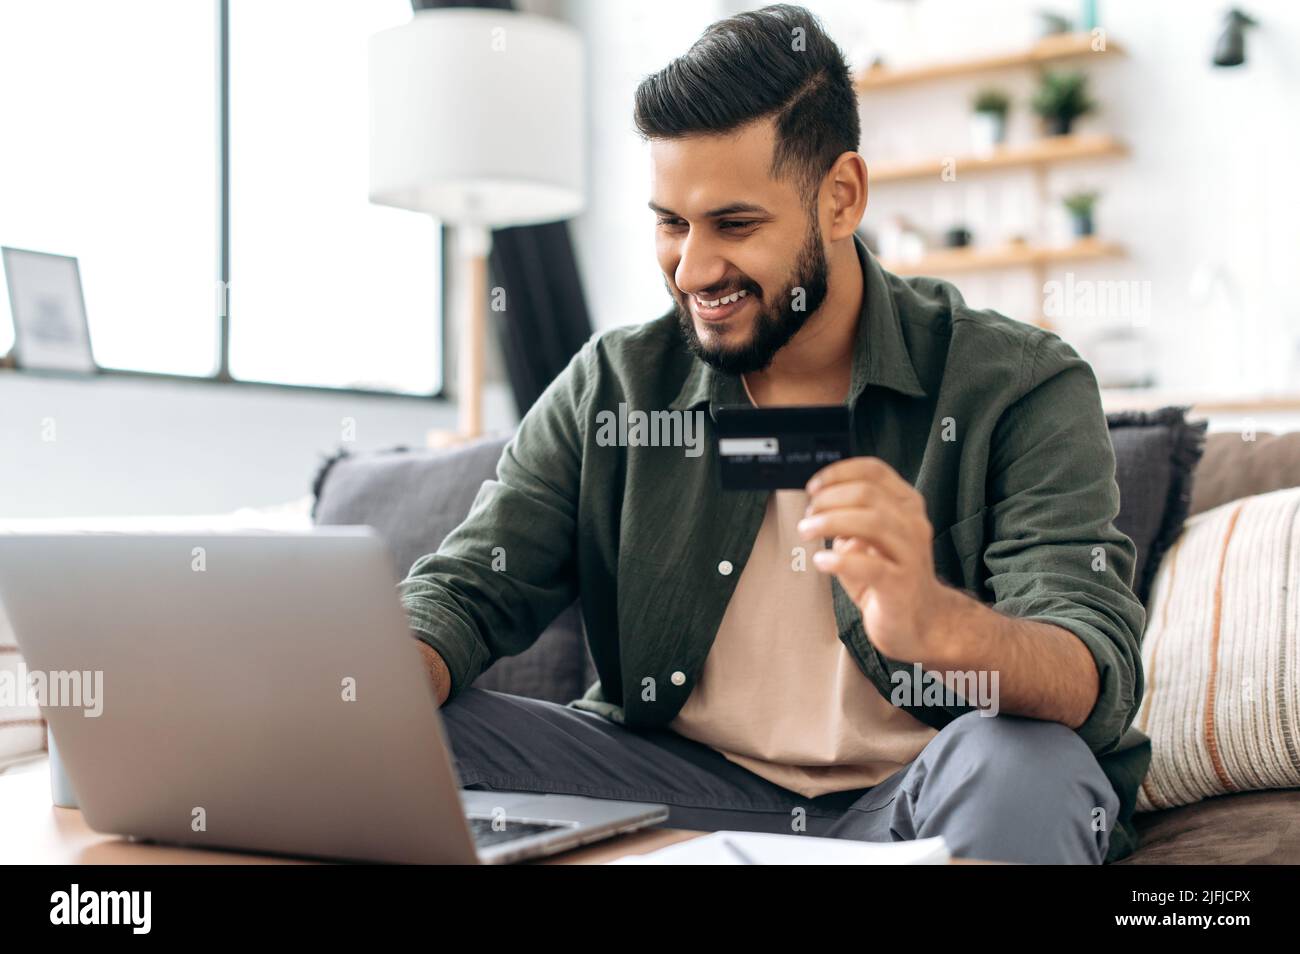 Indian or Arabian positive young male in casual wear, sitting in cozy living room, holding bank card in hand, using laptop, shopping online, ordering home delivery, paying bills, smiling Stock Photo